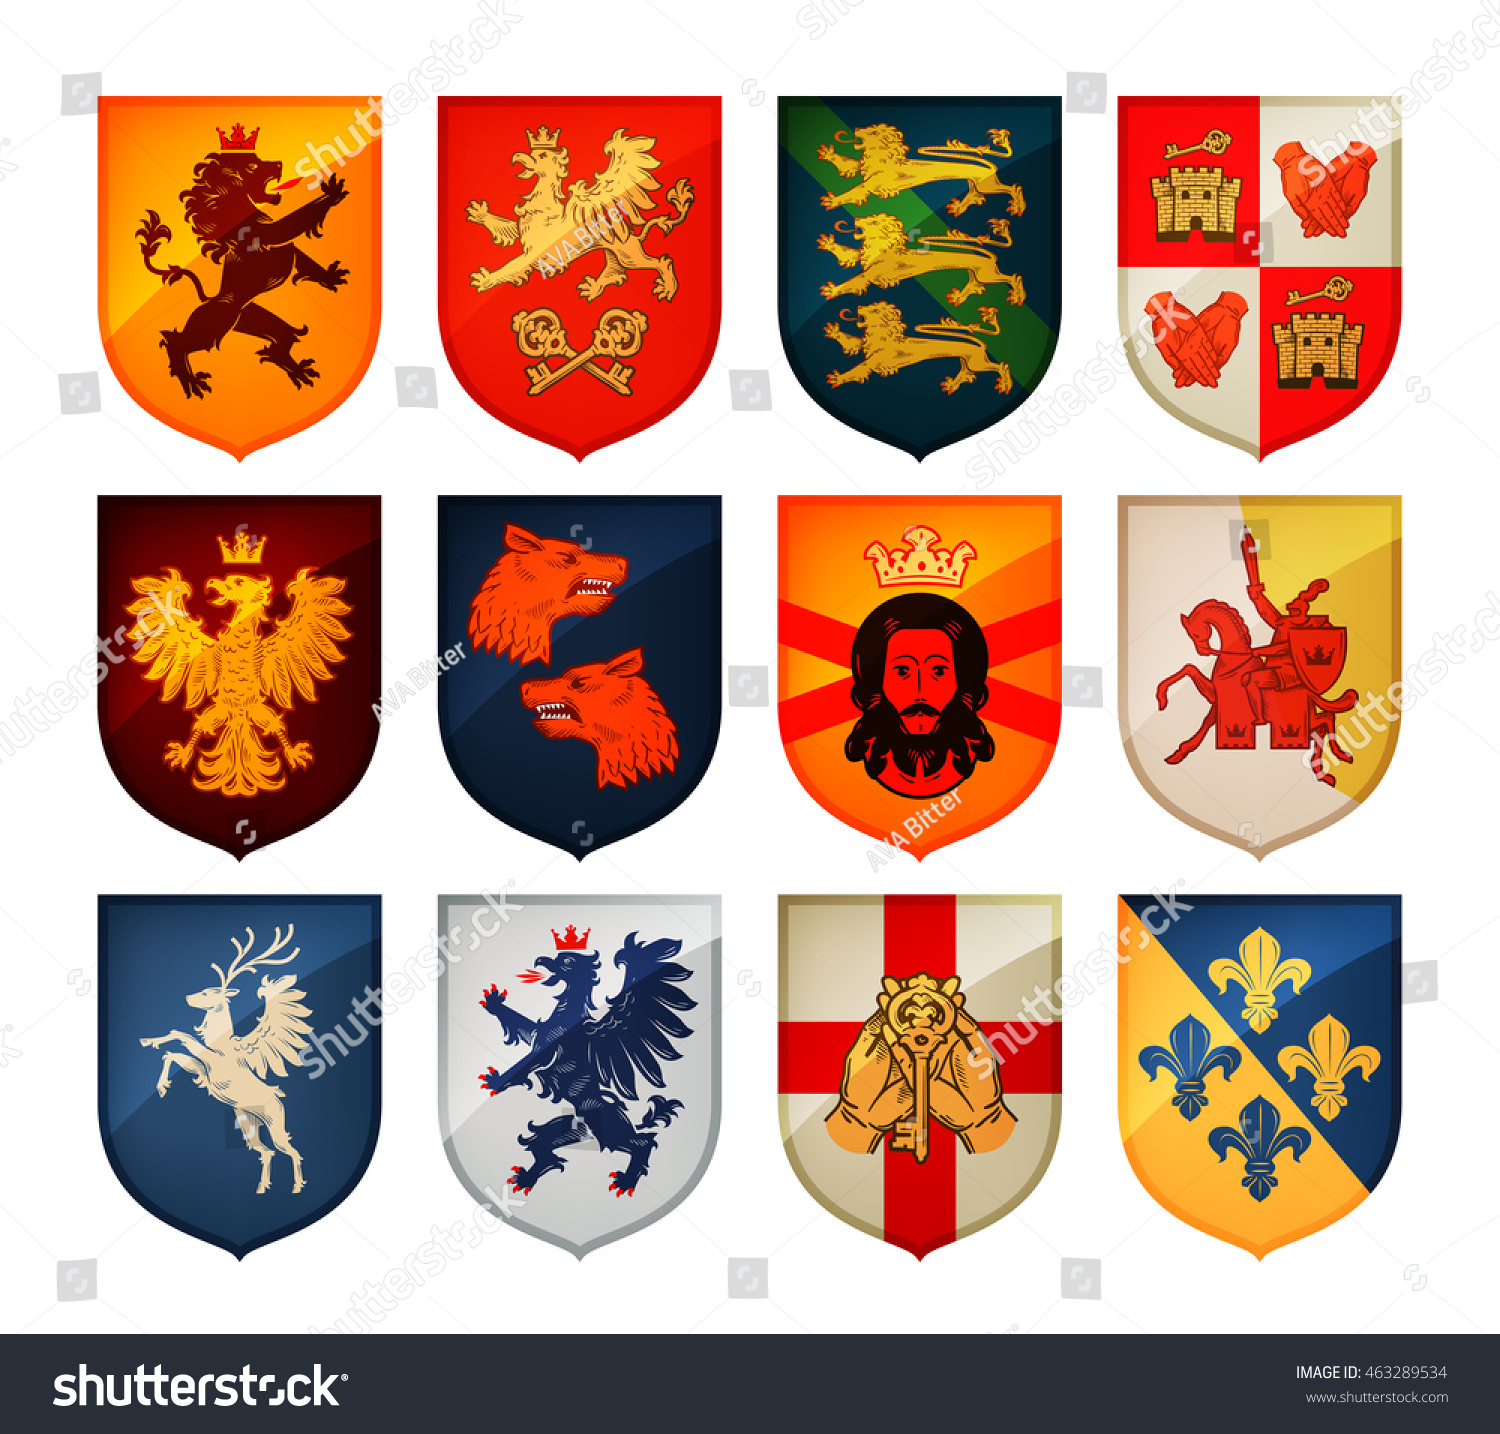 SVG of Royal coat of arms on shield vector logo. Heraldry, blazonry set icons svg